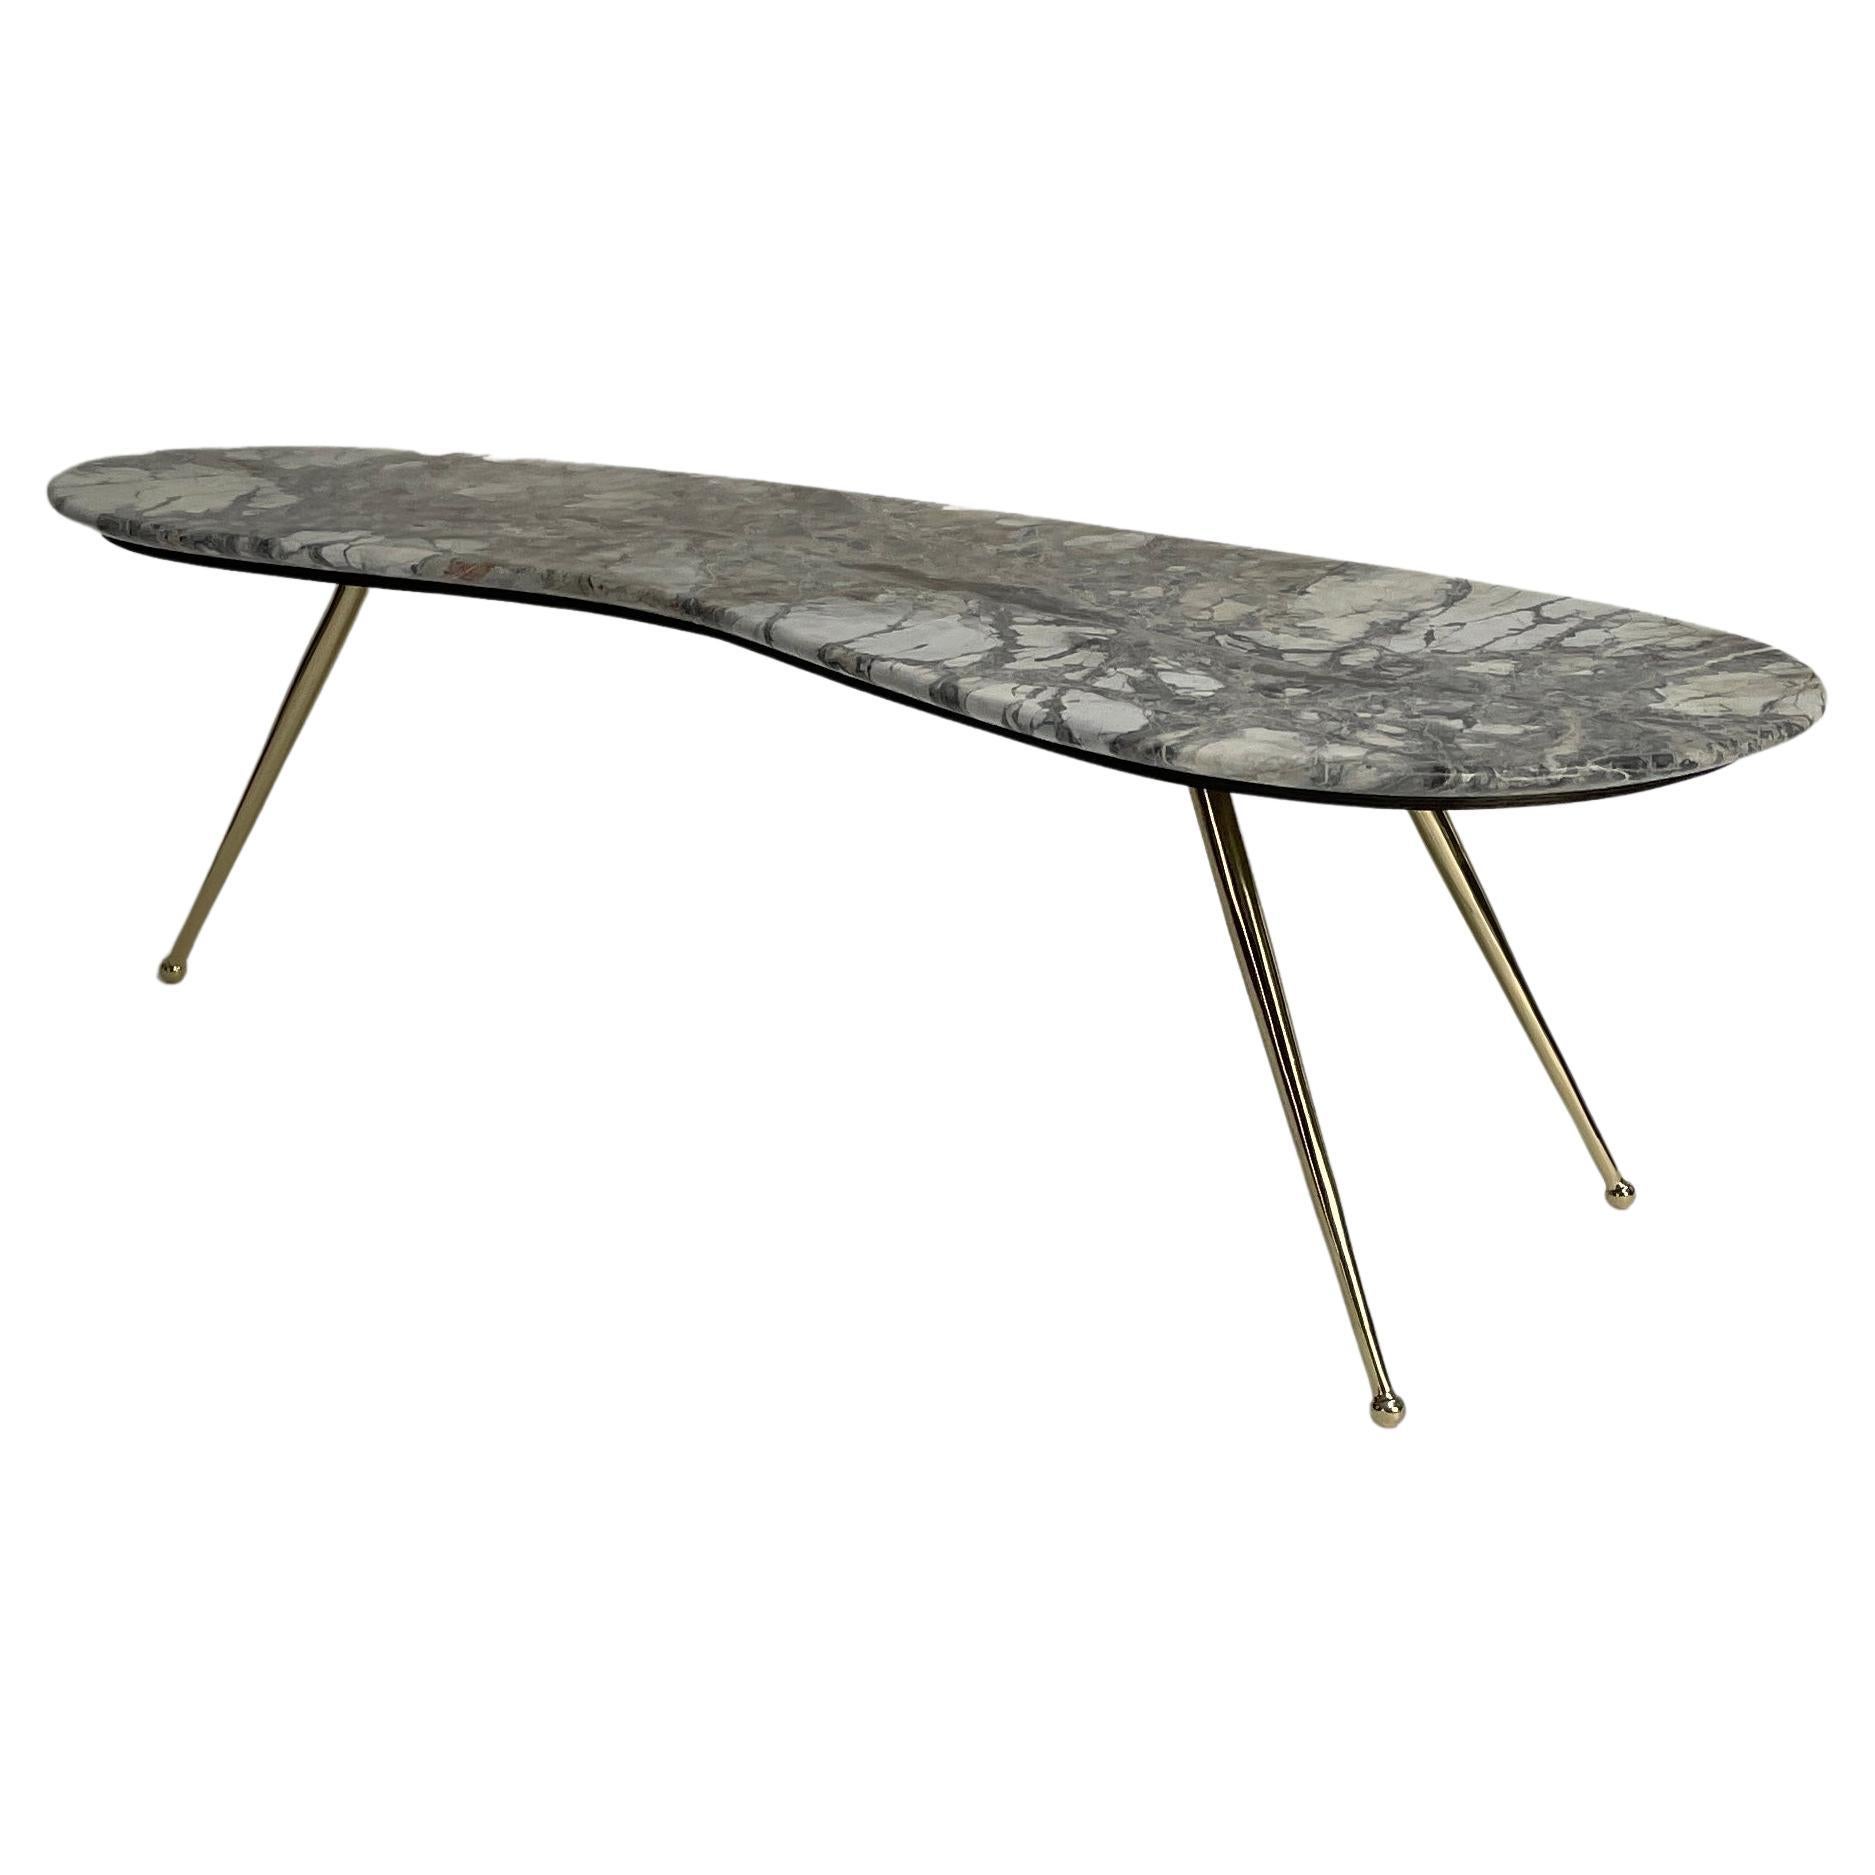 Briance Coffee Table, by Bourgeois Boheme Atelier